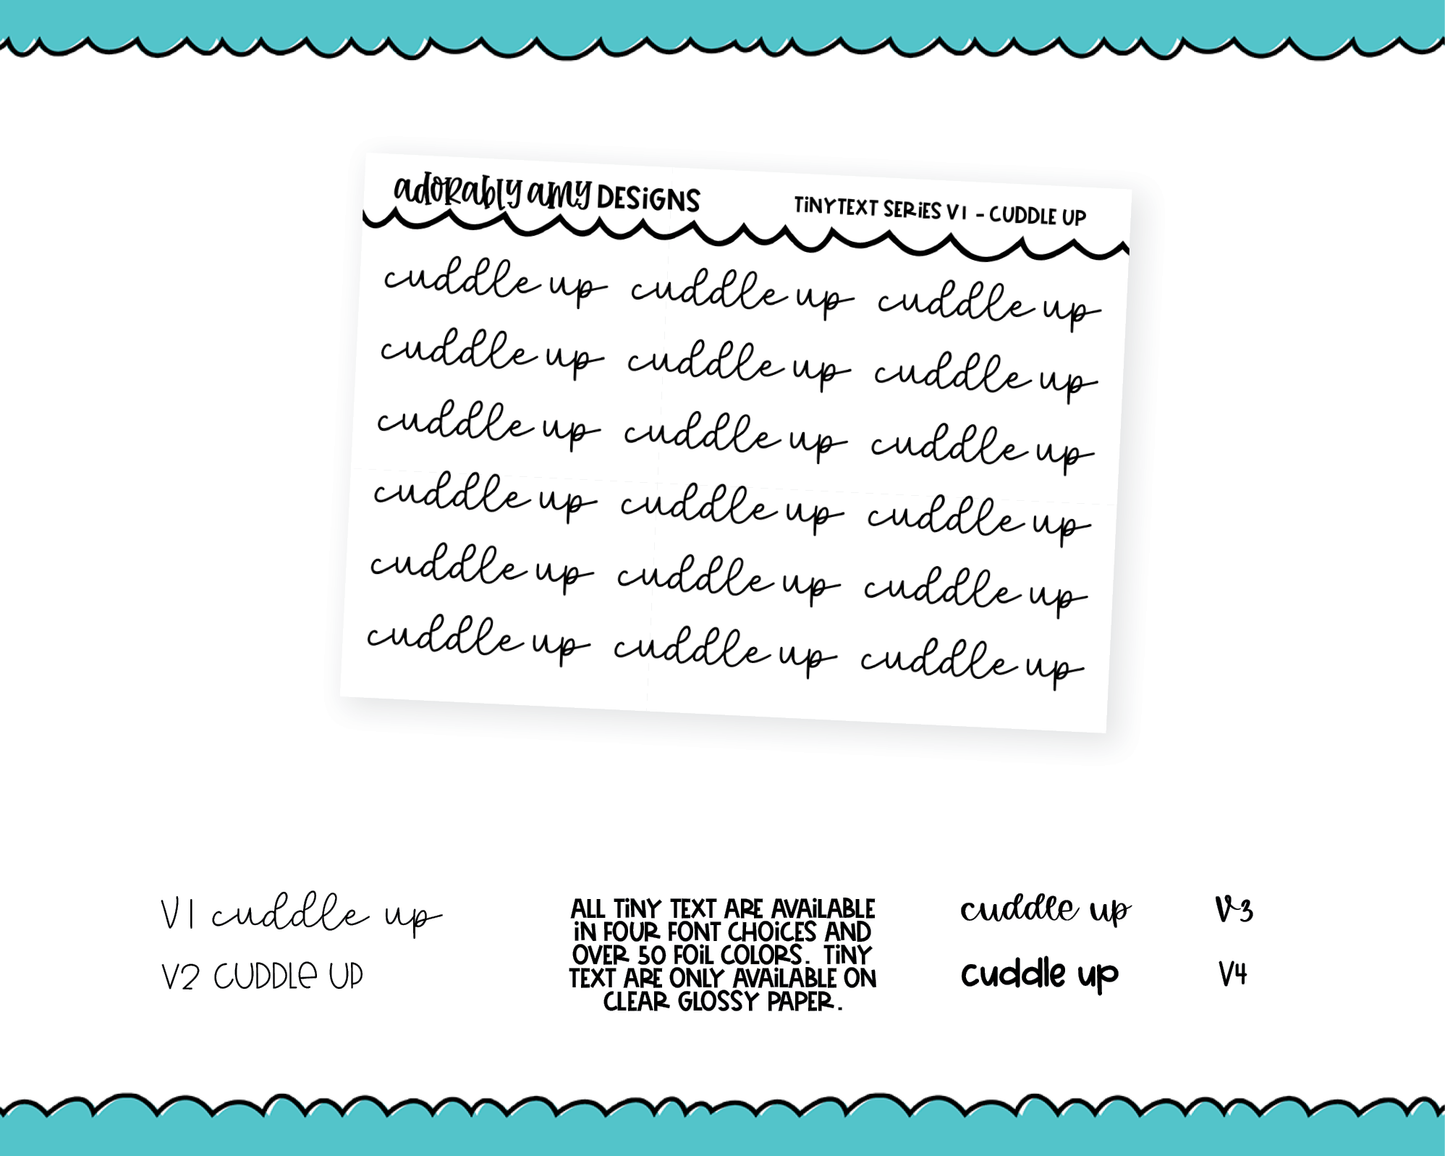 Foiled Tiny Text Series - Cuddle Up Checklist Size Planner Stickers for any Planner or Insert